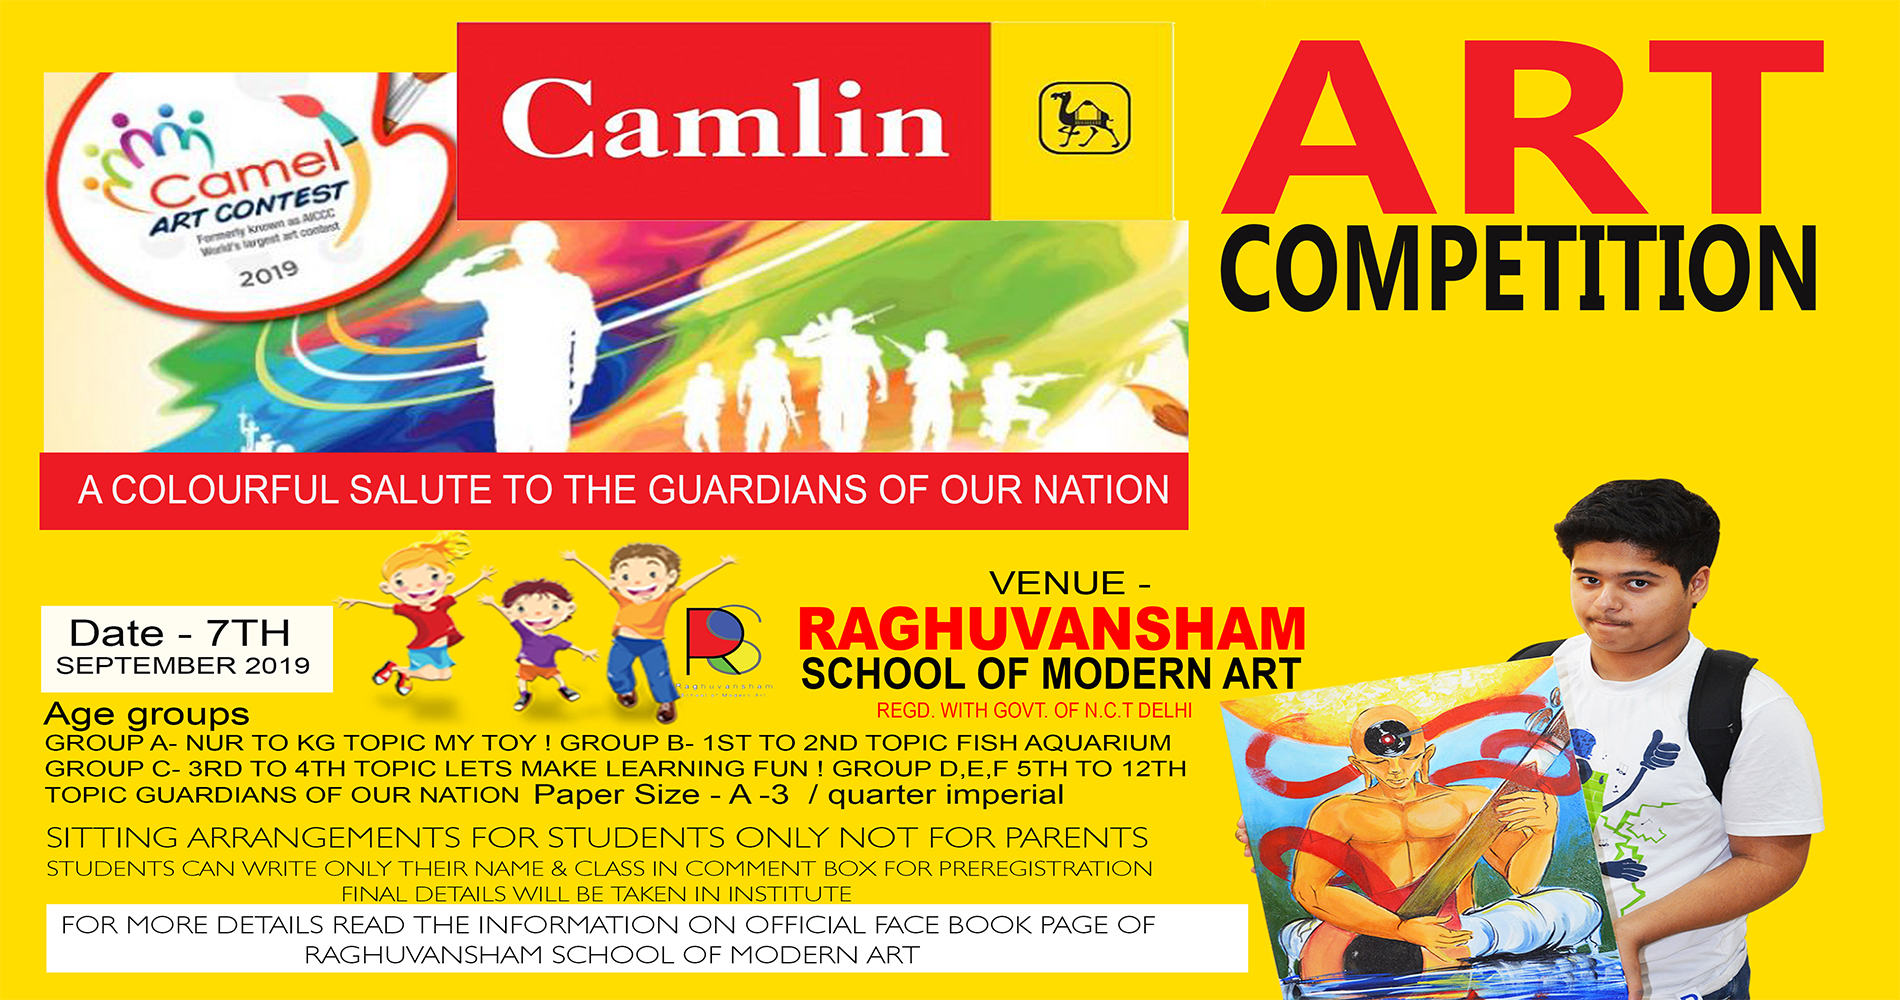 Camlin Art Competition 2019 - Competitions